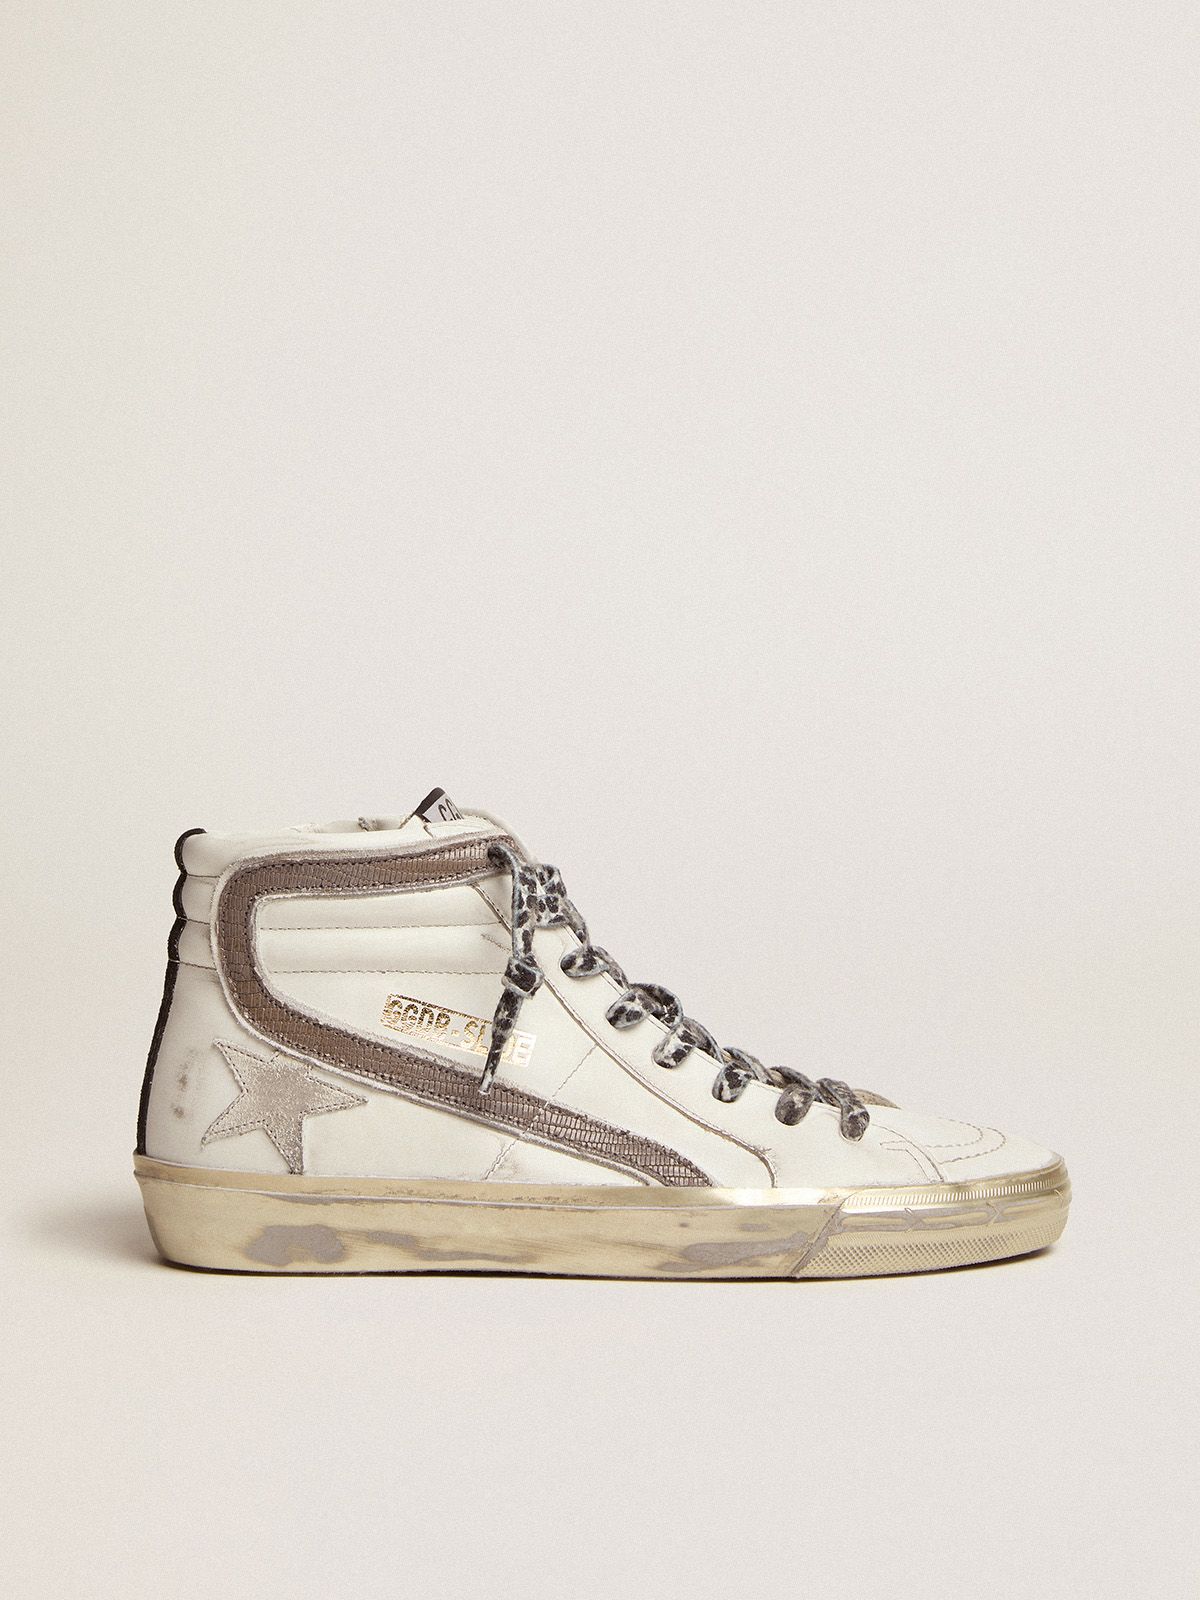 Slide sneakers with white suede star and dove-gray lizard-print leather flash